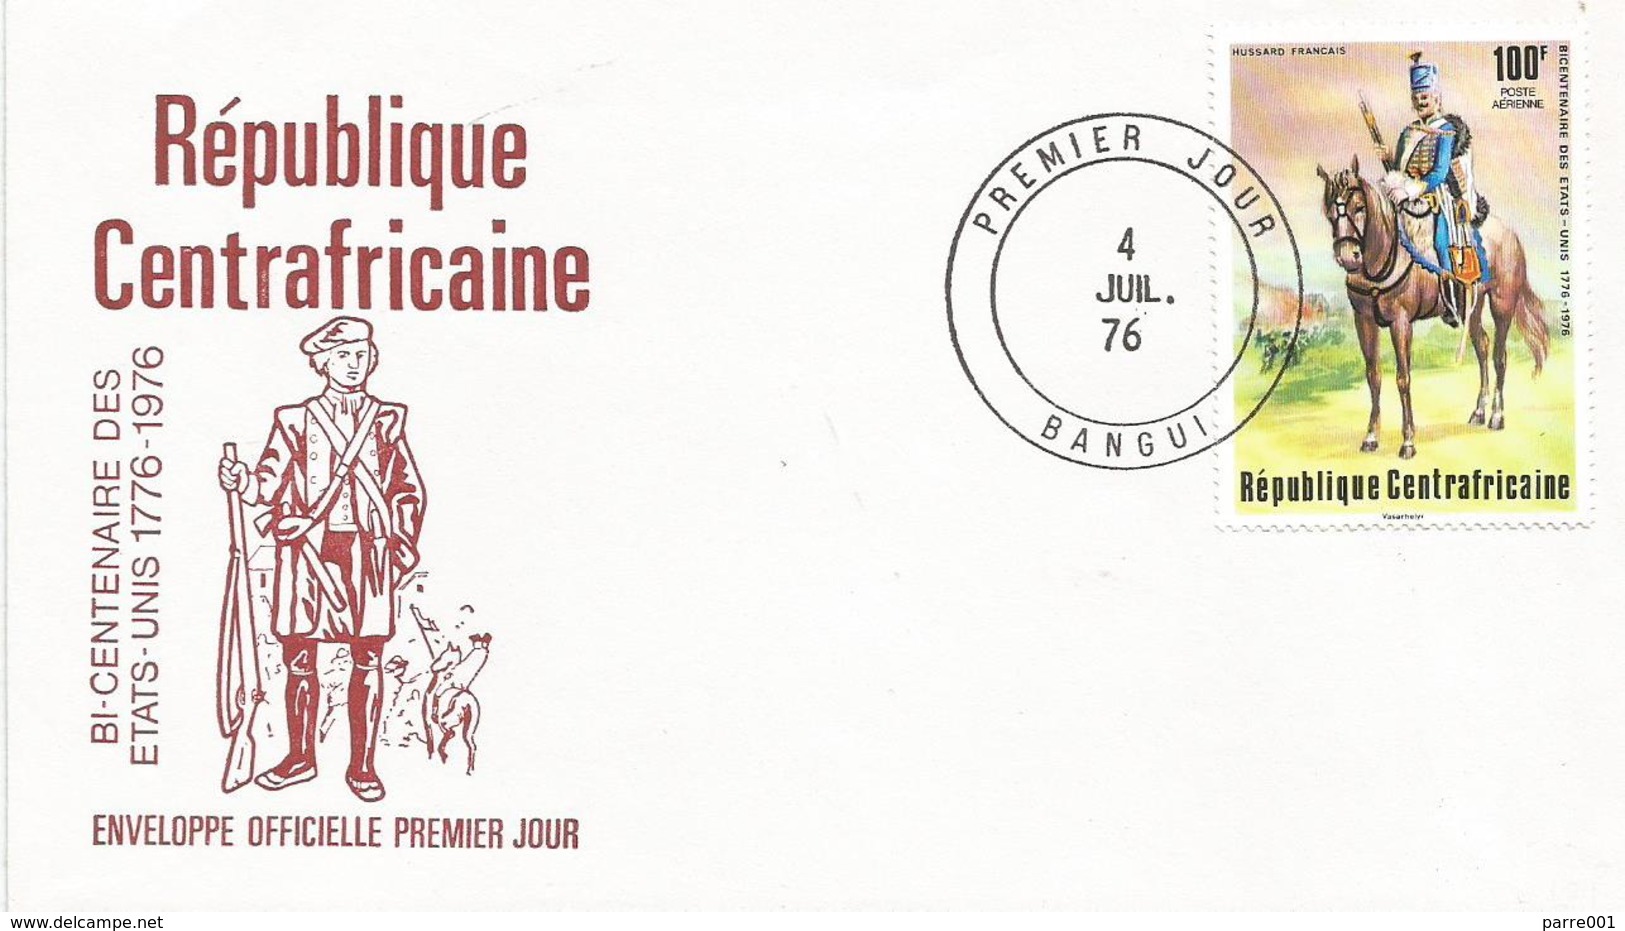 Centrafrique RCA CAR 1976 Bangui American Independence French Hussard FDC Cover - Onafhankelijkheid USA